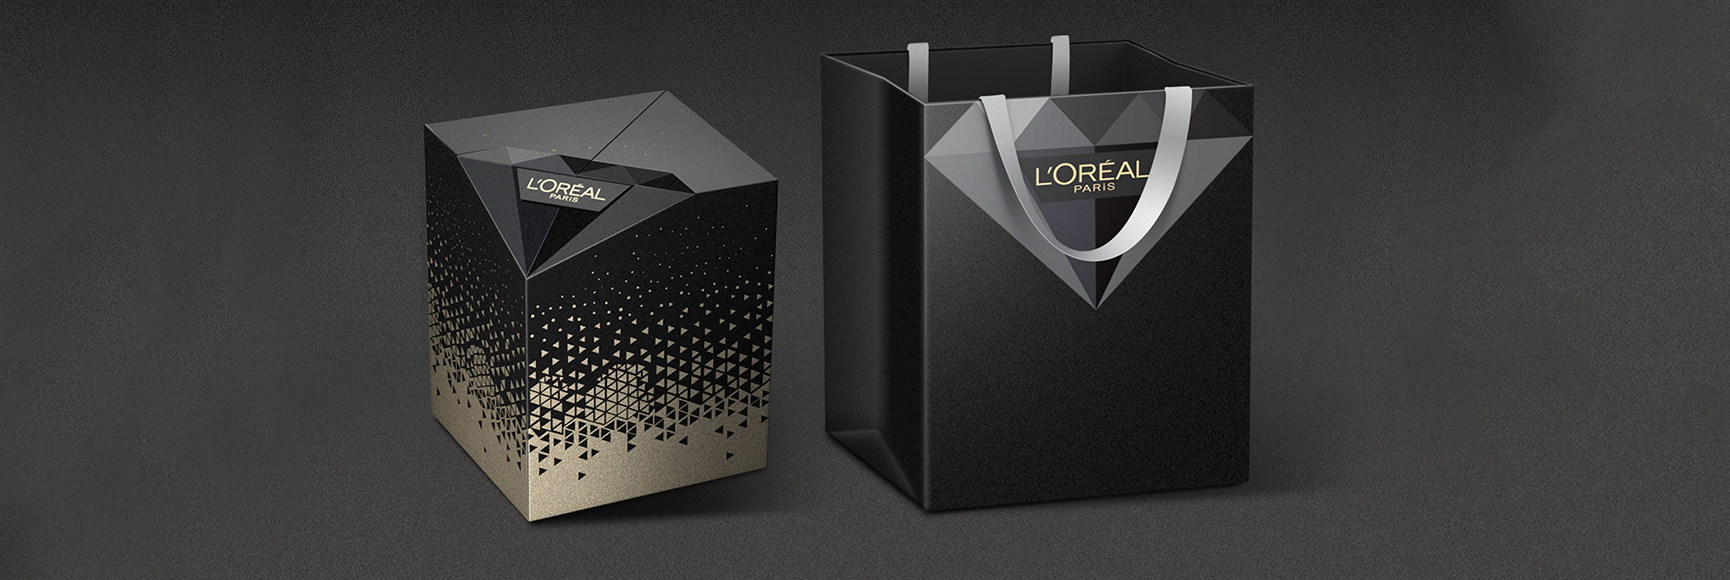 L'Oréal's Age Perfect deluxe skincare PR Giftset Packaging Design Featured Image